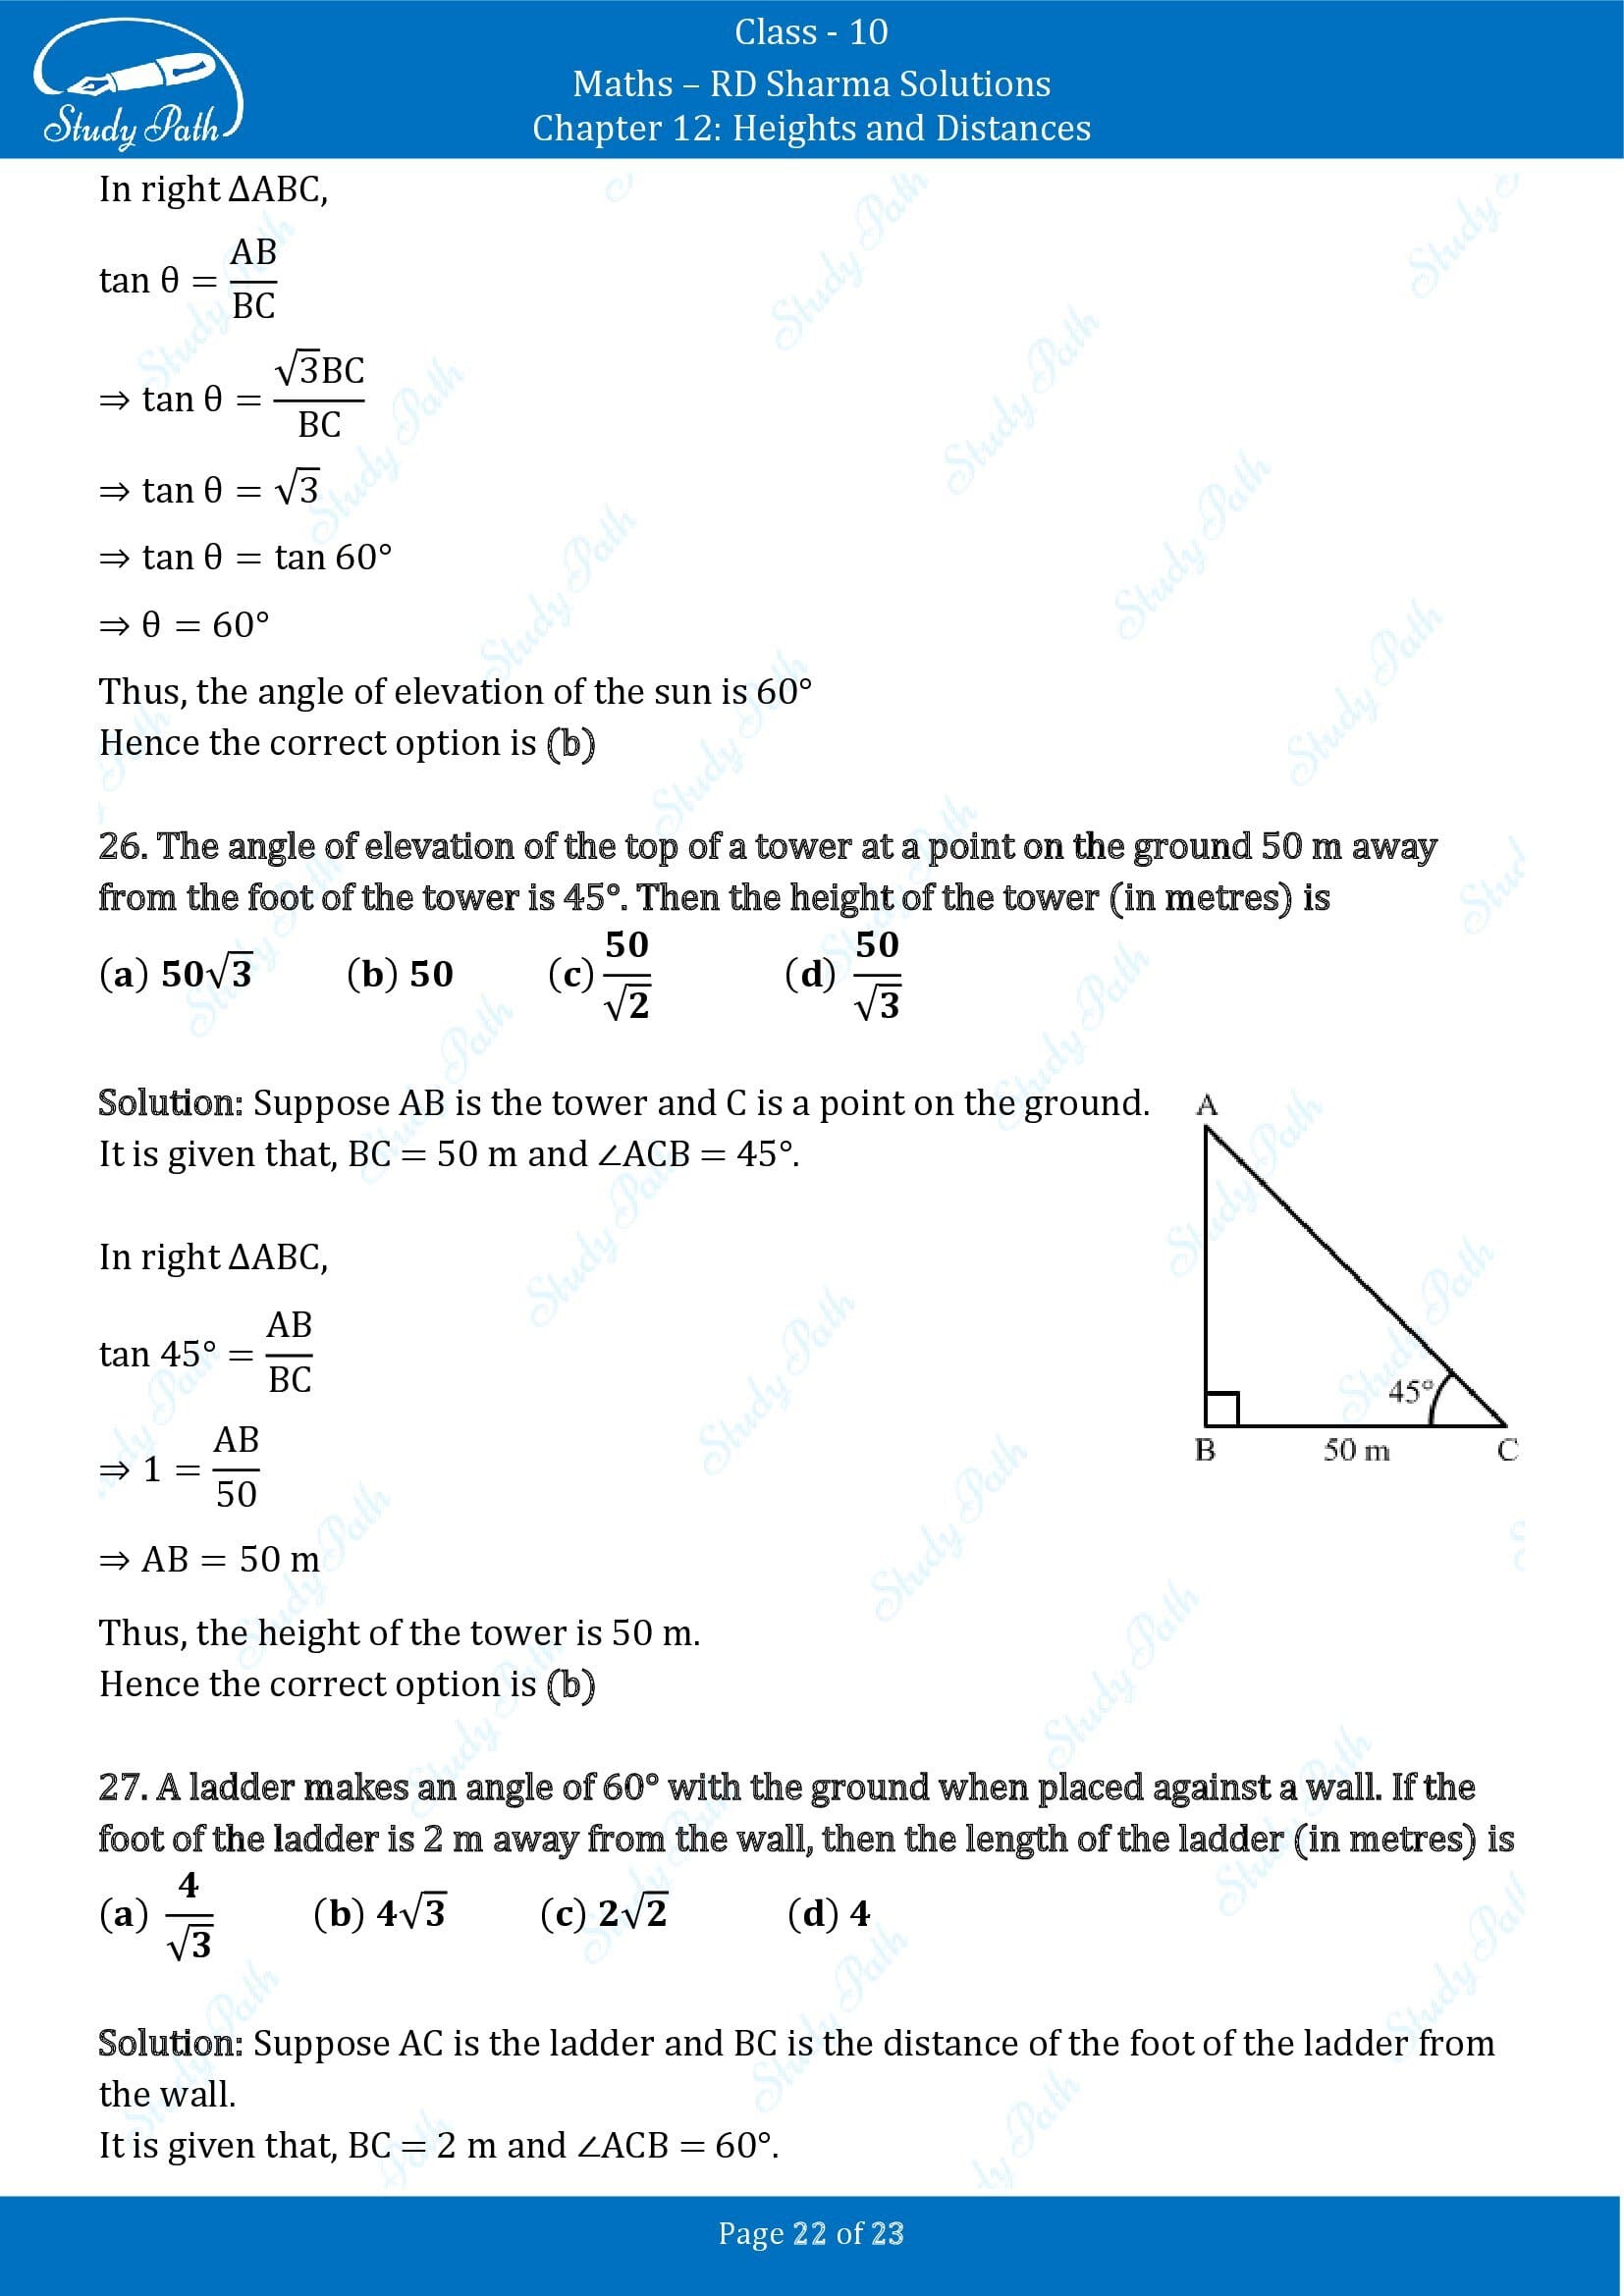 RD Sharma Solutions Class 10 Chapter 12 Heights and Distances Multiple Choice Question MCQs 00022